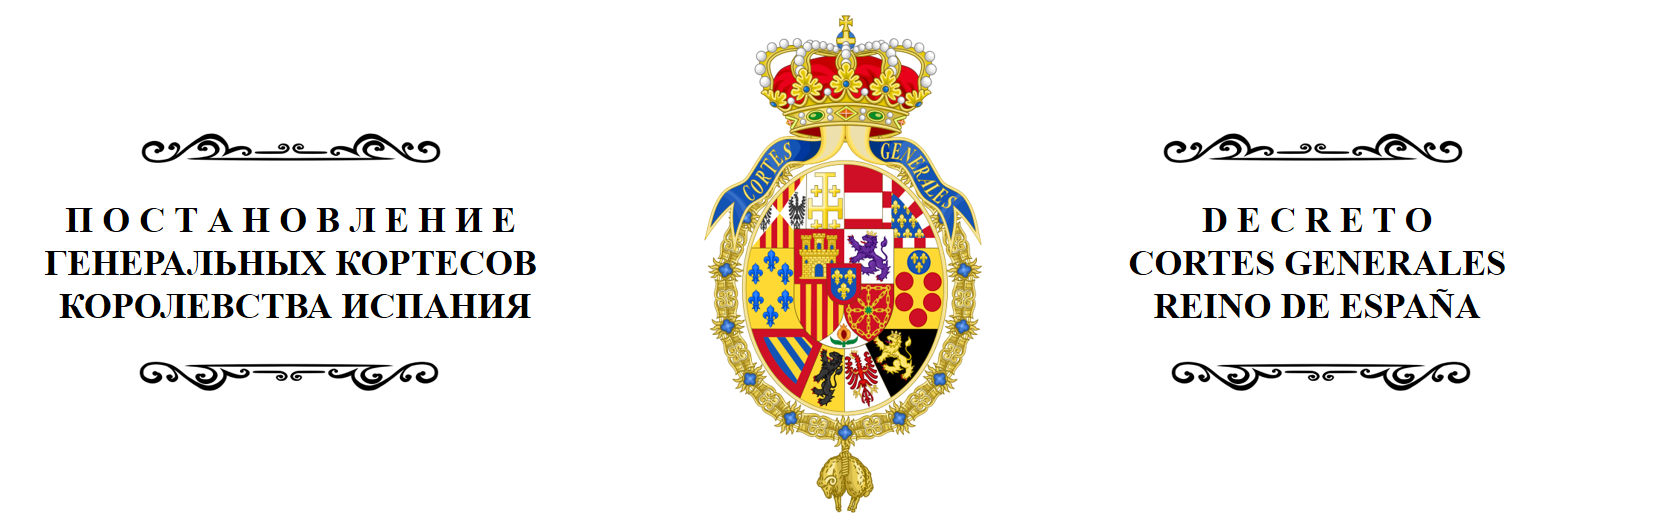 800px-coat_of_arms_ofwaf28.png